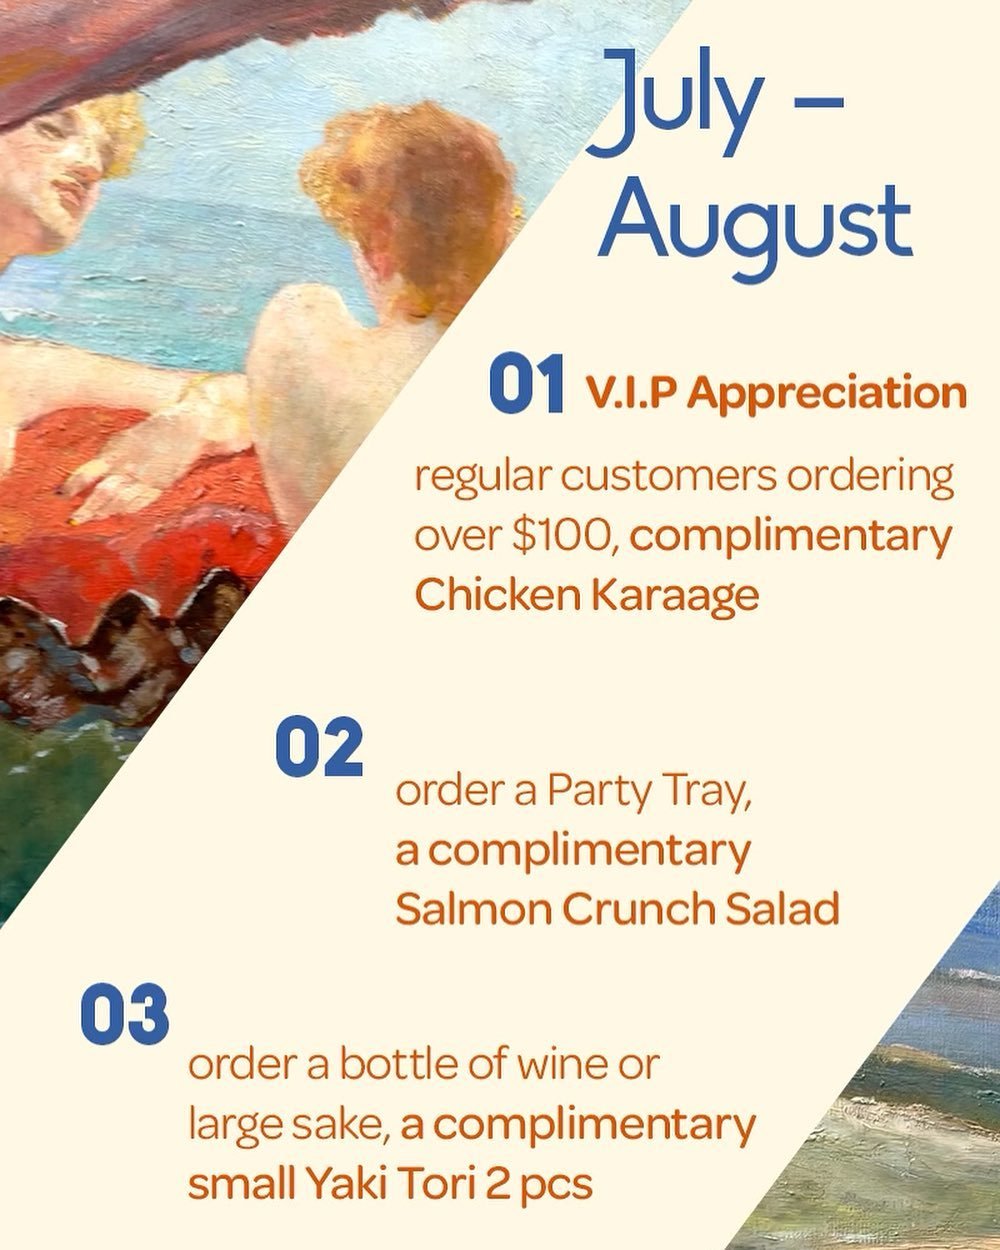 🎉🍣 Ongoing Promotion Alert! 🍣🎉

🍶 Want to add some cheer to your gathering? Choose our large bottle of sake or opt for our party tray, and discover the complimentary surprise specially curated to complement your festivities! 🍶🎈

 🎁 It's our w